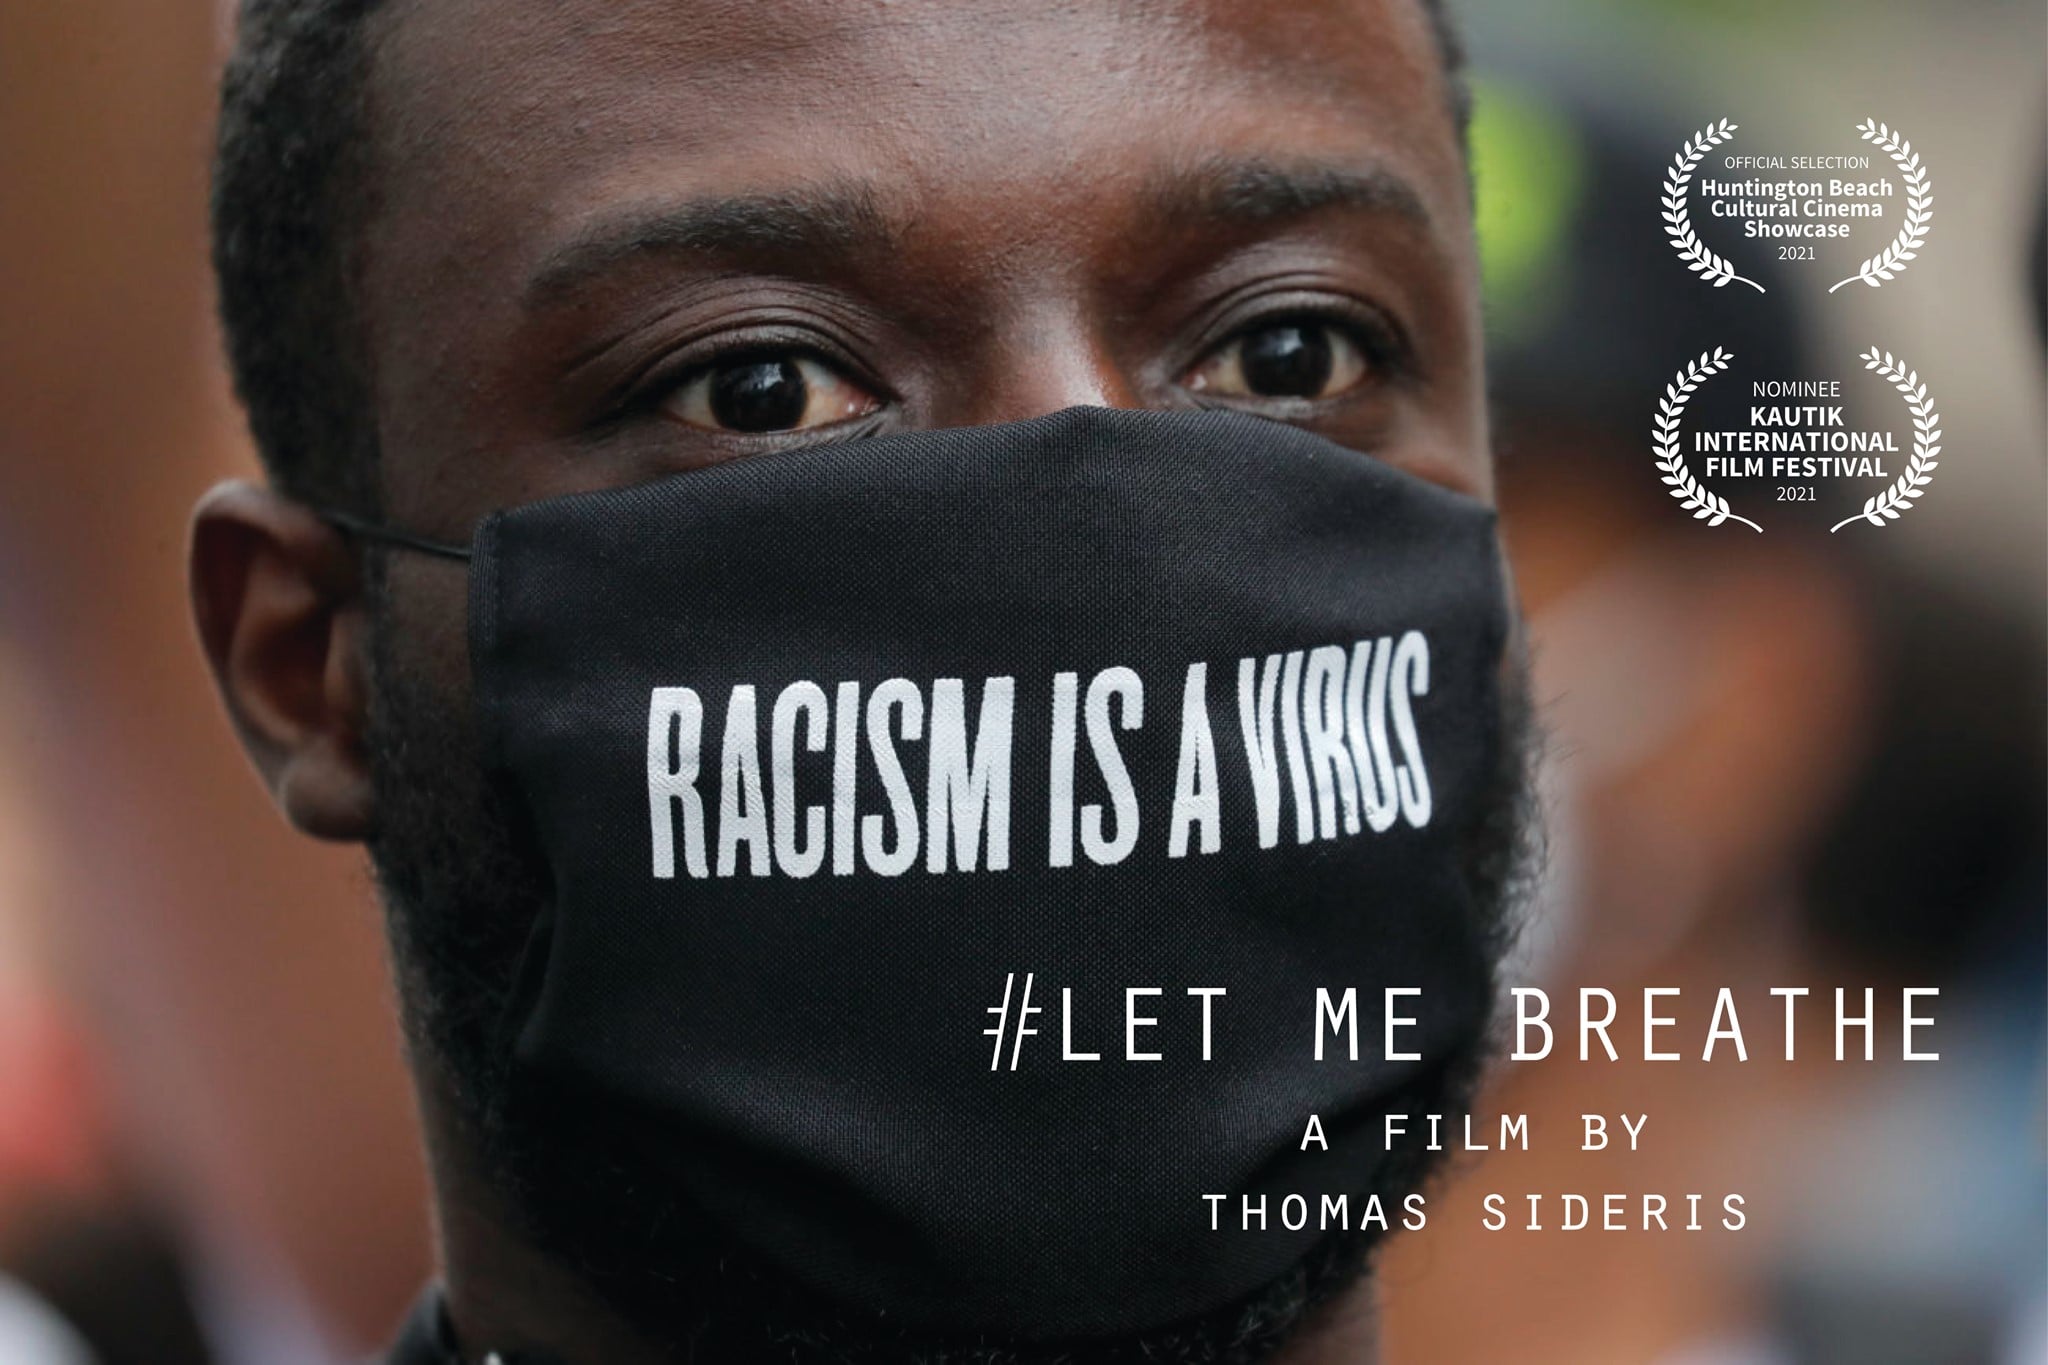 Let Me Breathe: Film Screening and Panel Discussion